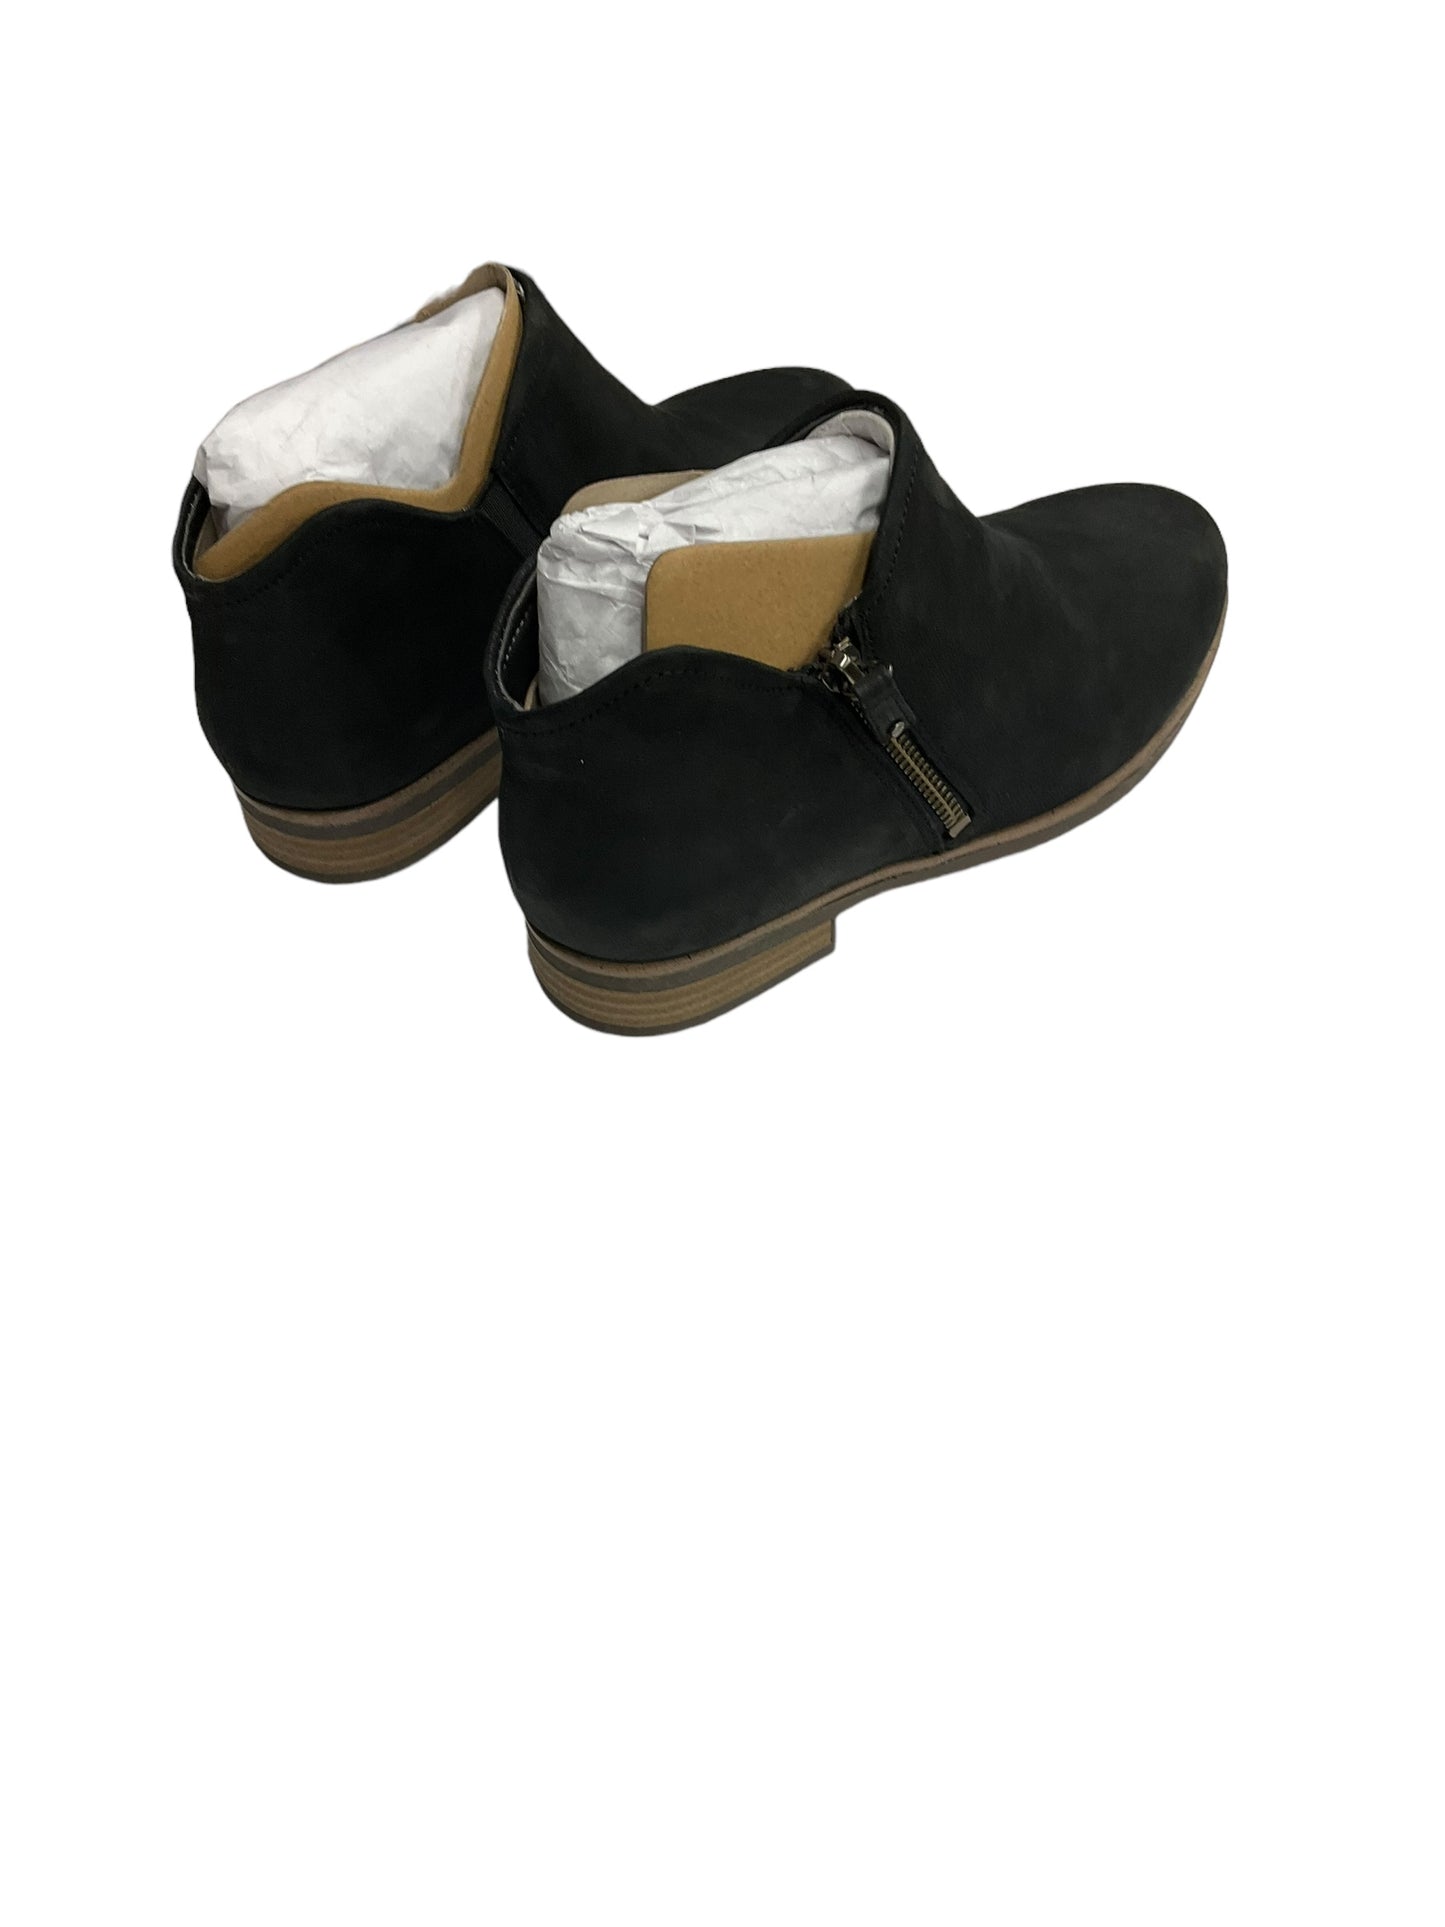 Boots Ankle Flats By Dr Scholls  Size: 6.5